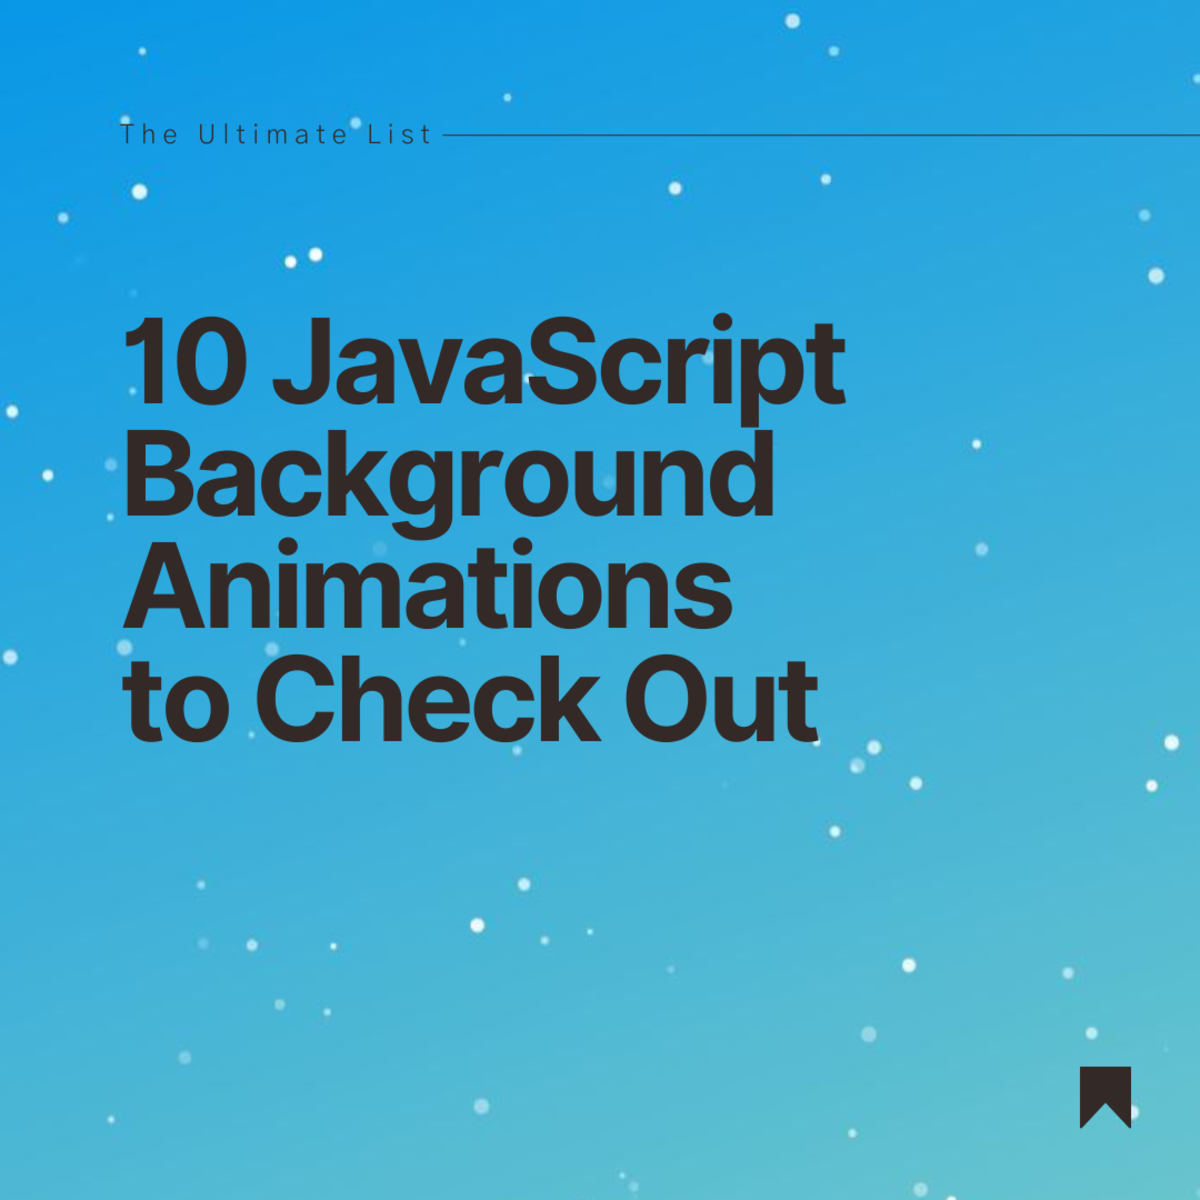 10 JavaScript Background Animations You Can Quickly Add to Your Site -  TurboFuture